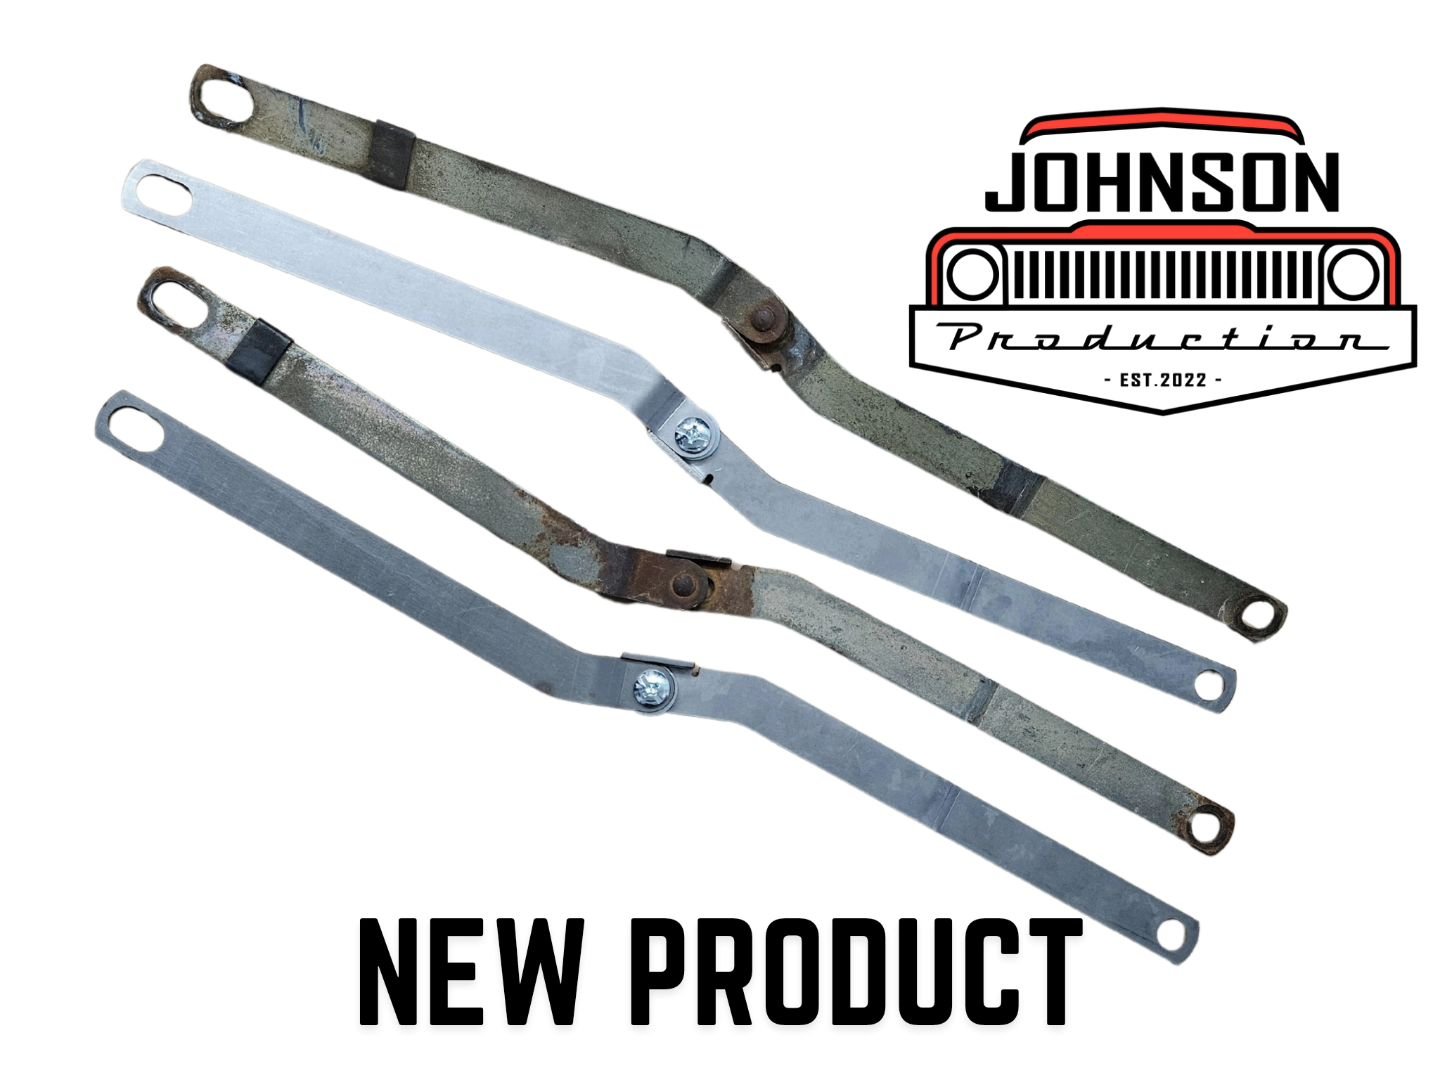 NEW PRODUCT - Full Size Jeep Wagon Tailgate Straps. Reproduction tailgate straps for FSJ wagoneers and Cherokees are now available. 11 gauge bare steel, Made in USA. 

Available at Johnsonproductionjp.com 

#FullSizeJeep #Wagoneer #Cherokee #J10 #J20